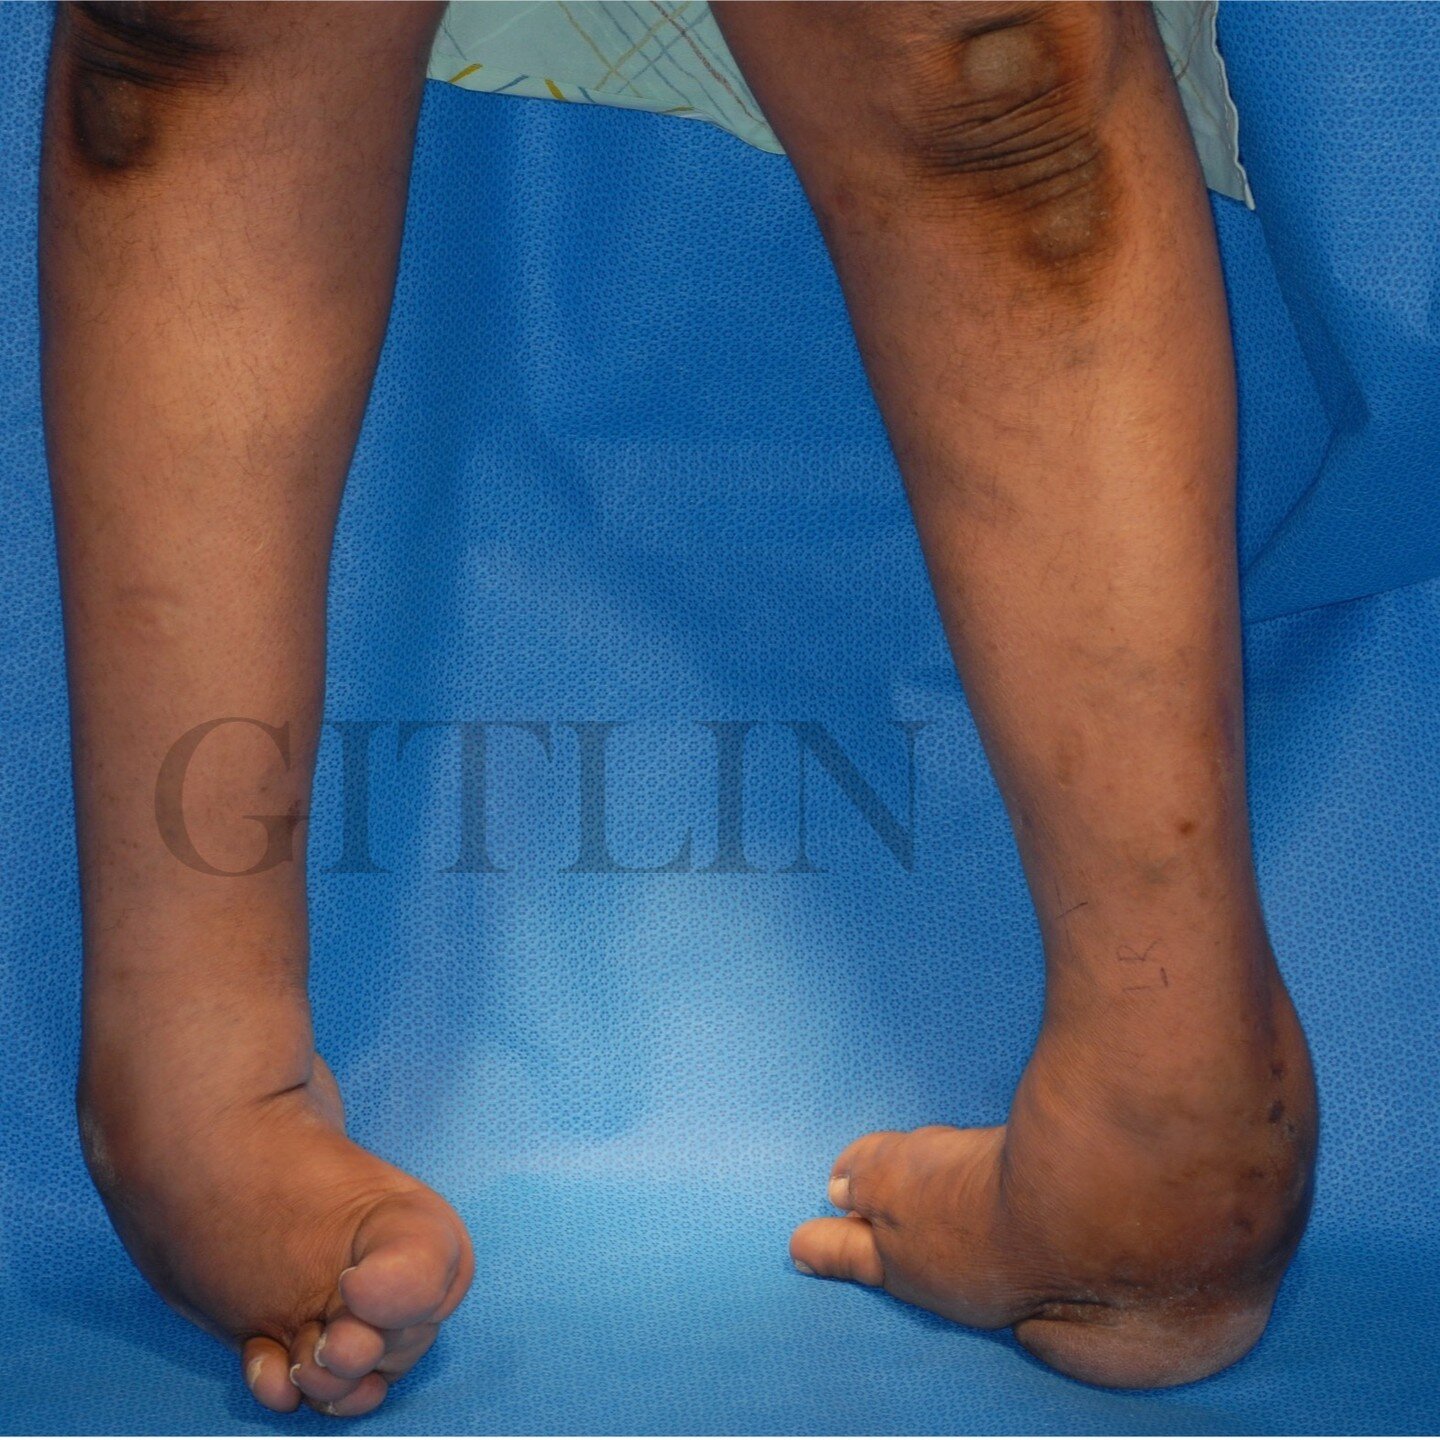 Part 2 (before and after) lets fix the right foot on our 38 year old Clubfoot patient. We are using a similar no incision ilizarov technique on the right foot that we used in the left foot. He was born with clubfoot and his family didn't have the mea